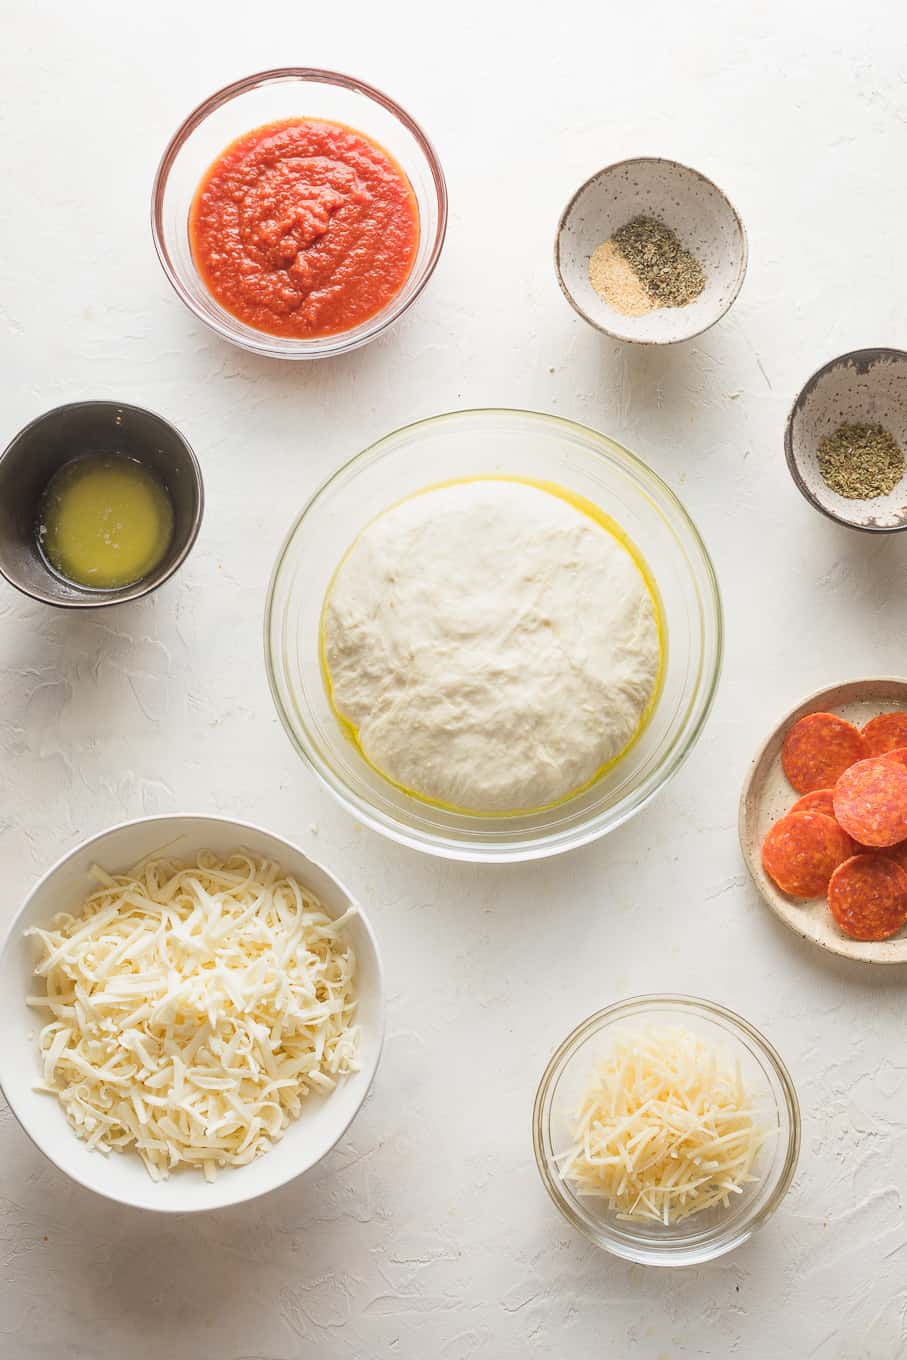 Ingredients for pepperoni pizza and crust in bowls on a white surface.